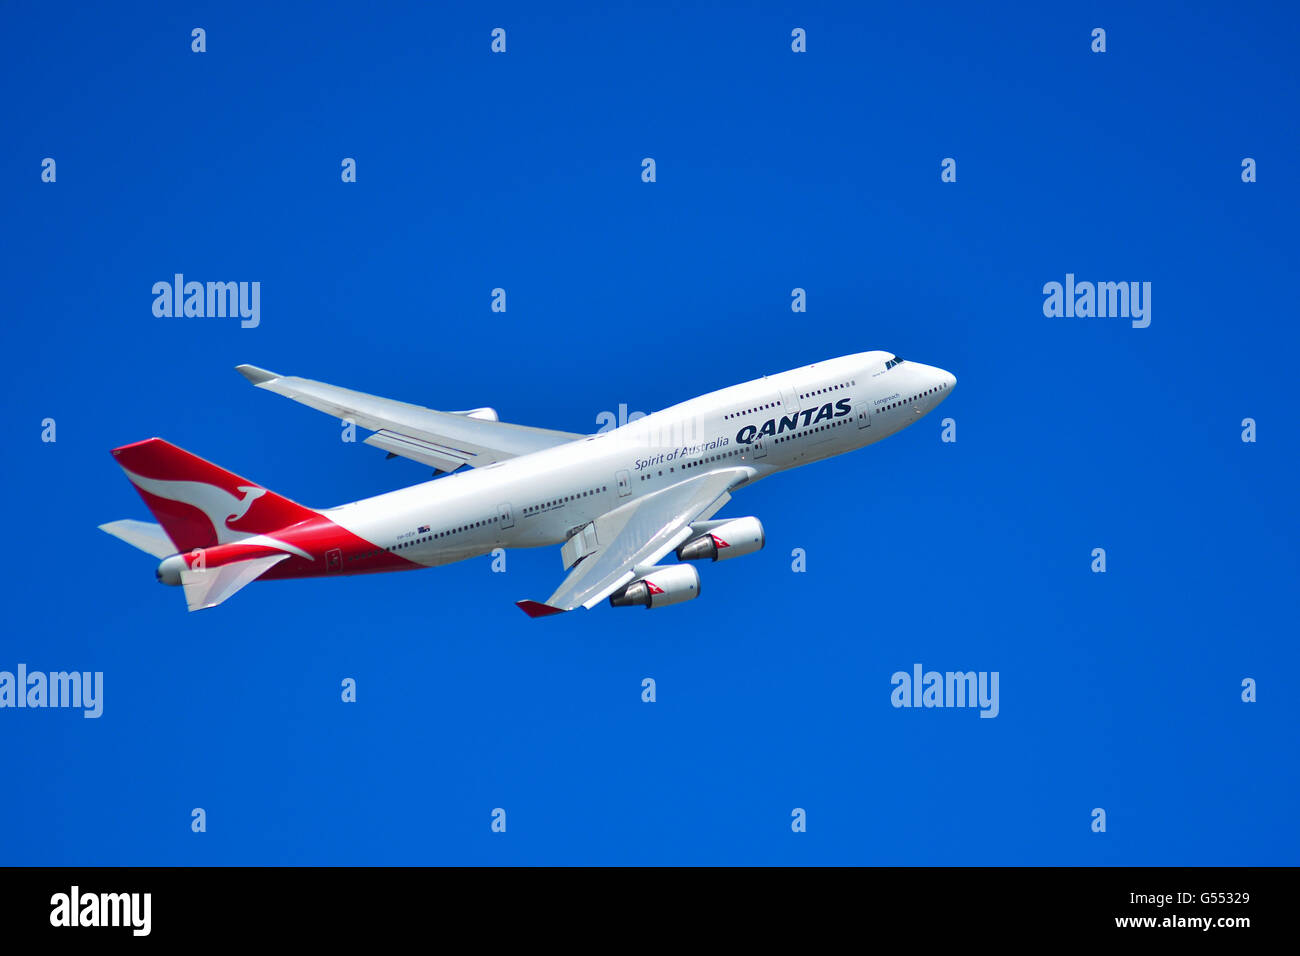 An airplane of Qantas, the national airline of Australia Stock Photo